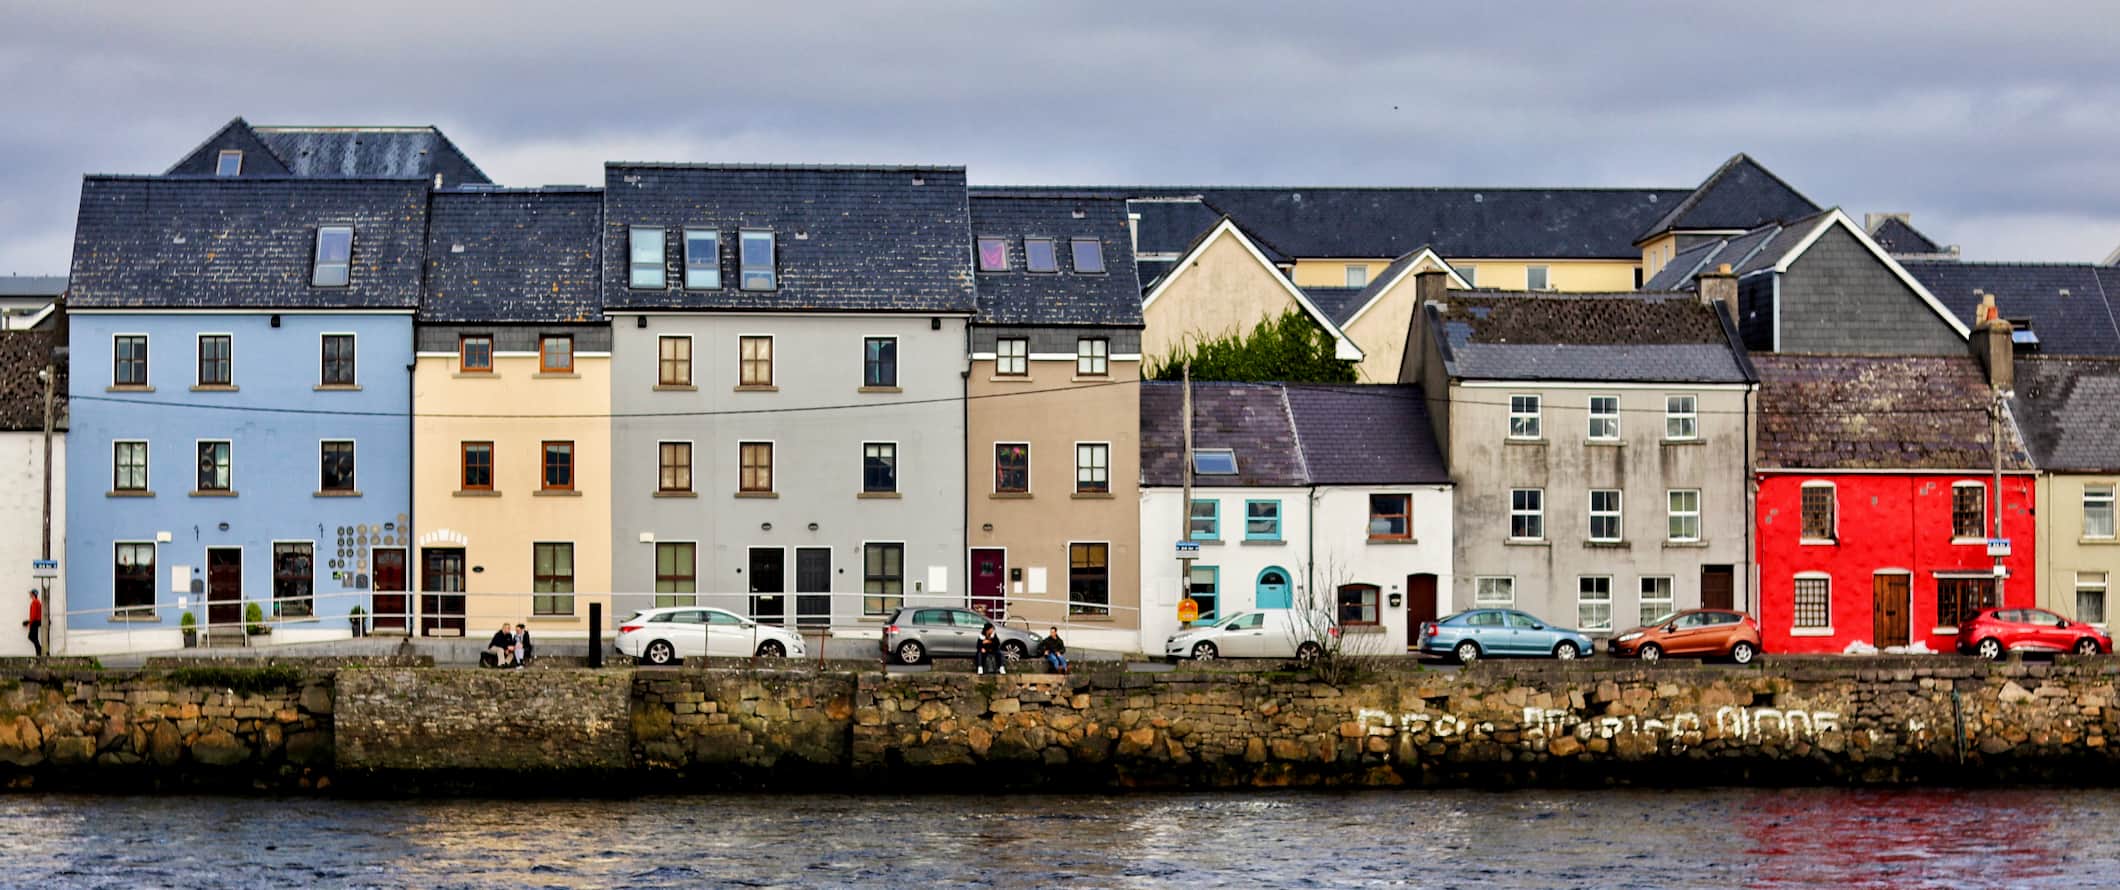 view of Galway, Ireland and the waterfront with colorful houses along the coast